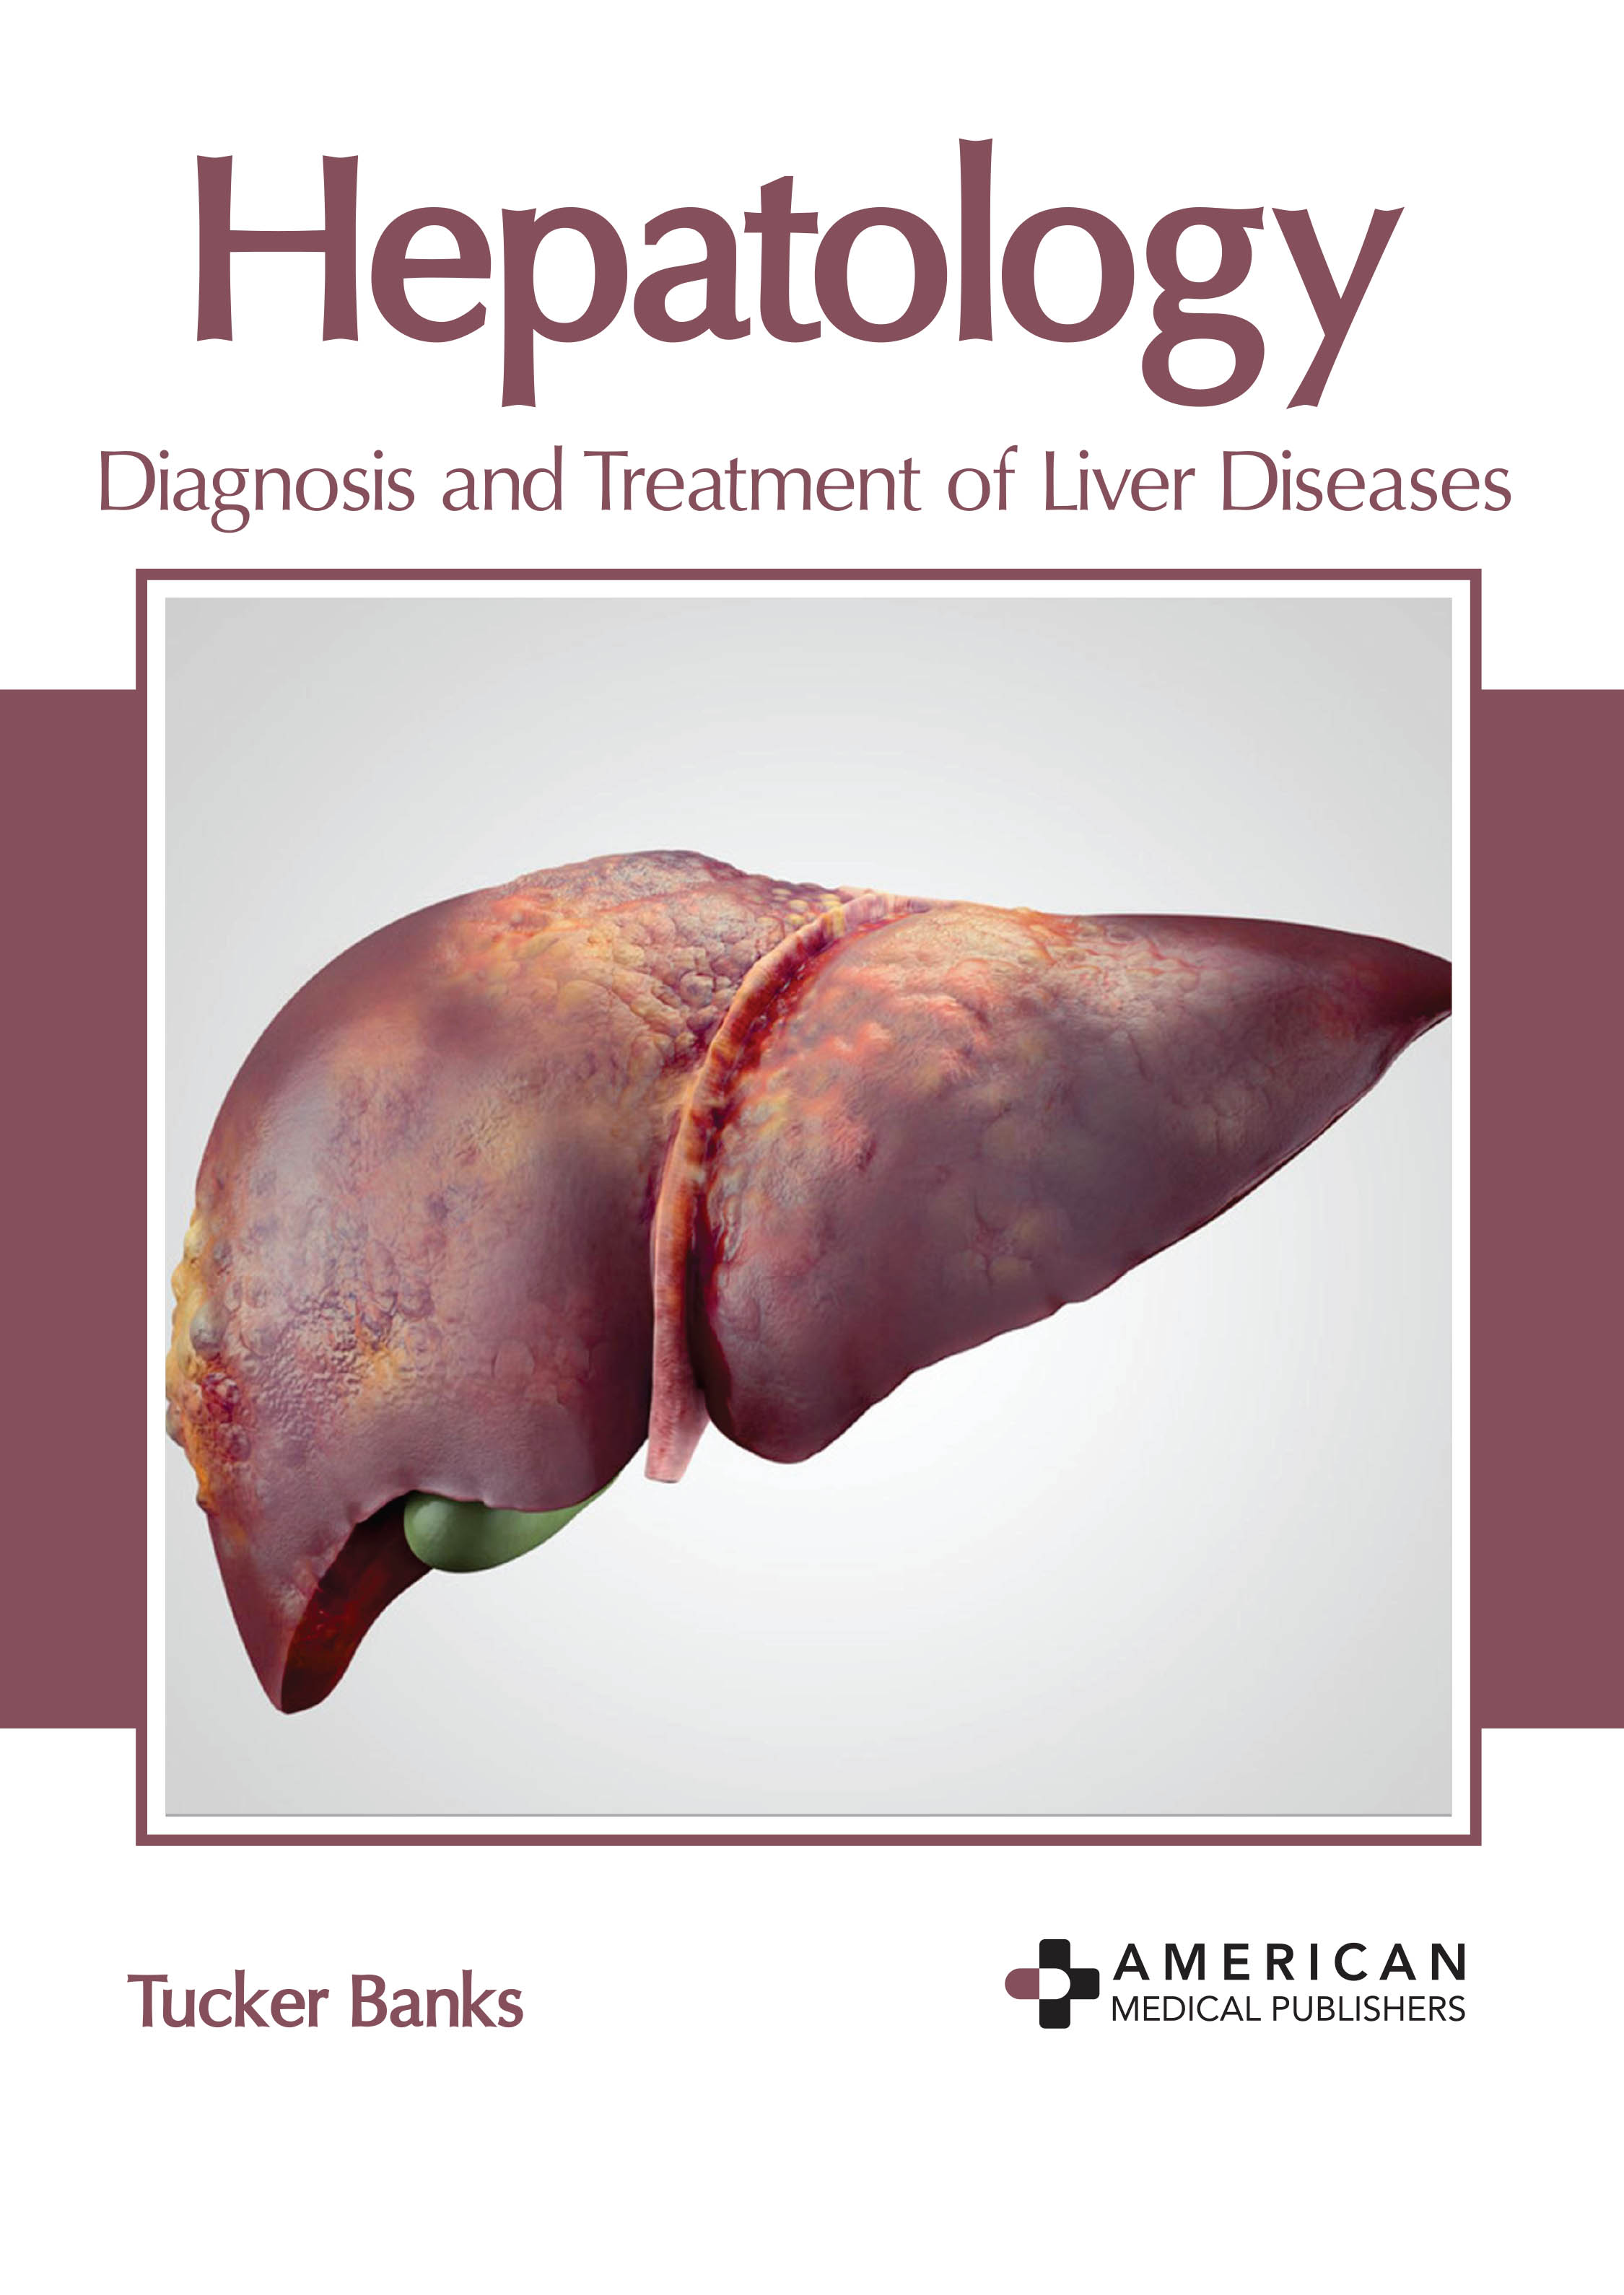 HEPATOLOGY: DIAGNOSIS AND TREATMENT OF LIVER DISEASES